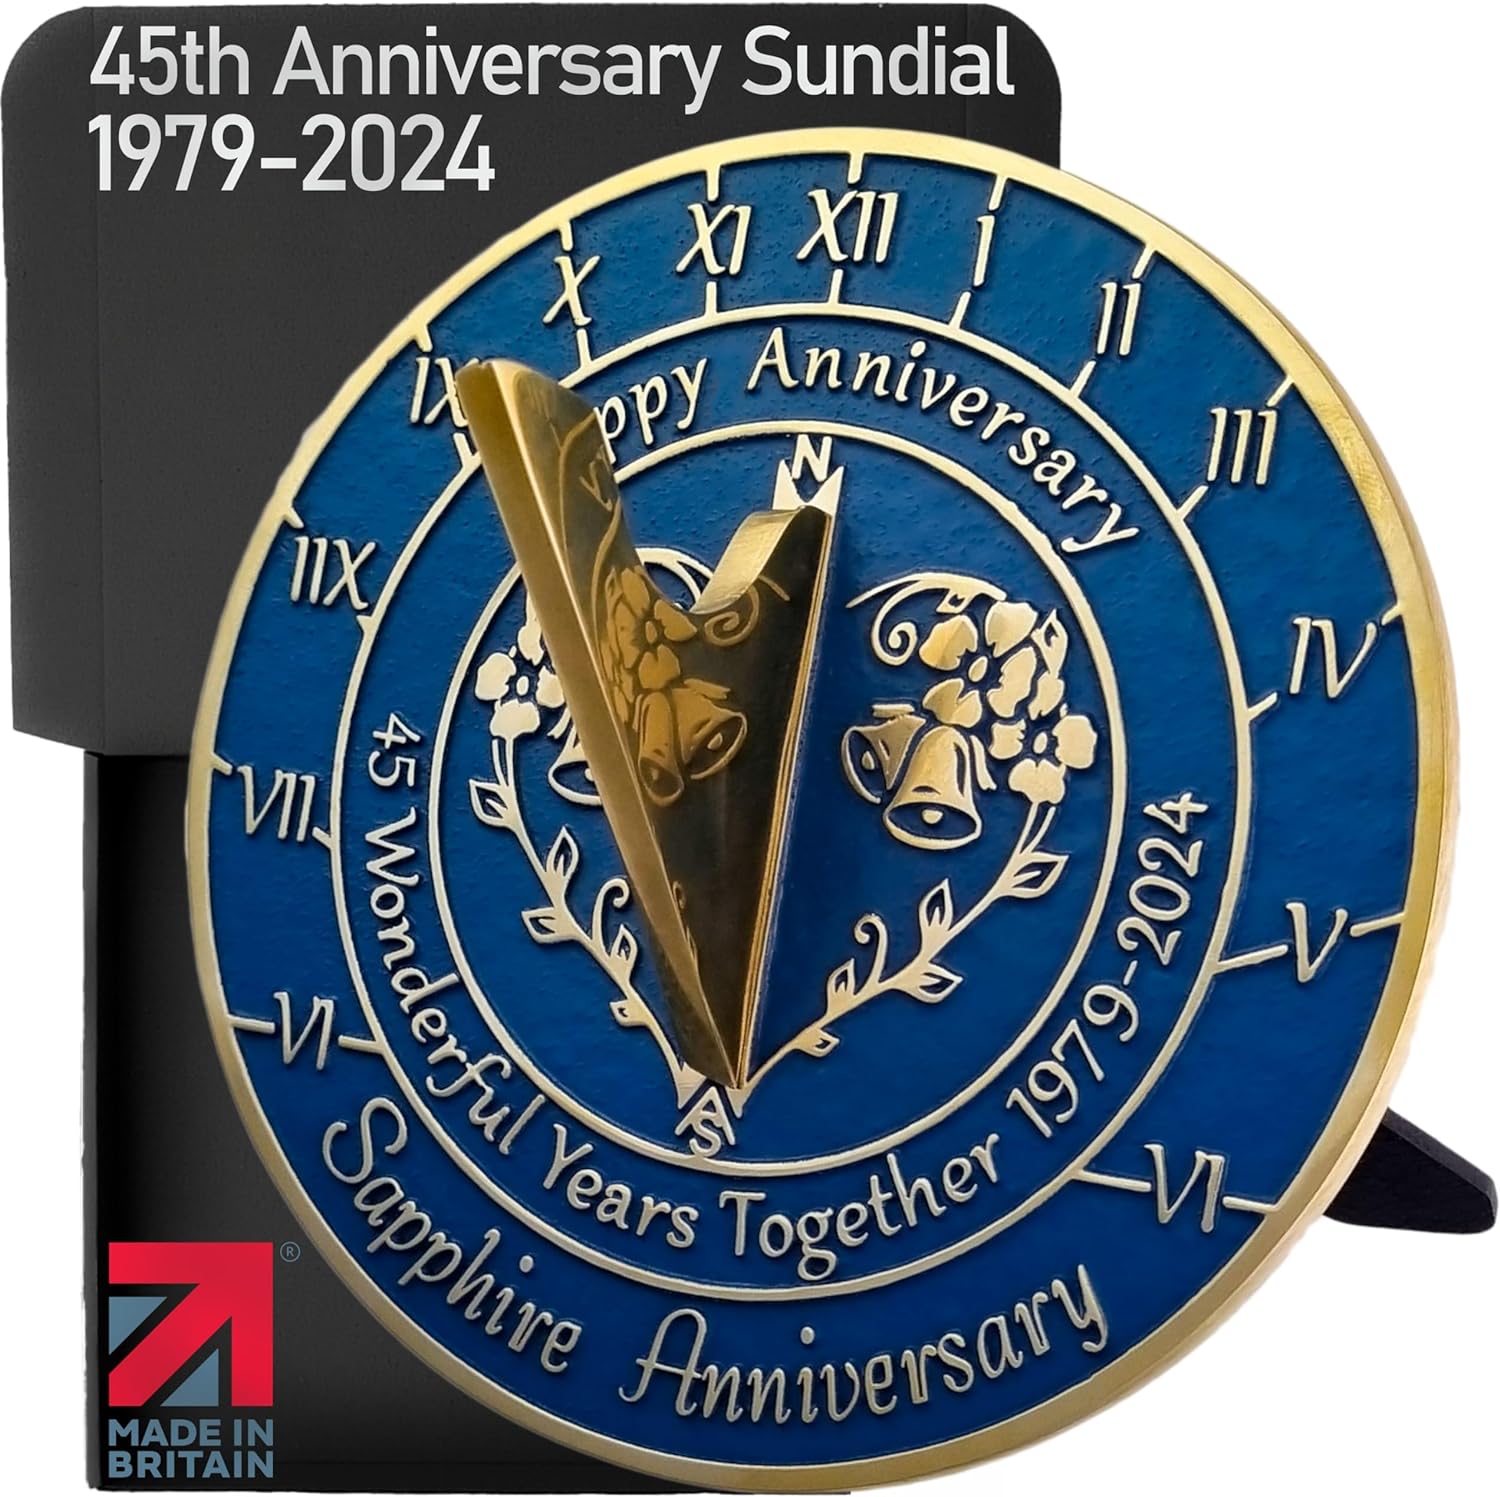 Anniversary Sundial Gift for 45th Sapphire Wedding Anniversary in 2024 - Recycled Metal Home Decor Or Garden Present Idea - Handmade in UK for Him, Her Parents Or Couples 45 Year Celebration